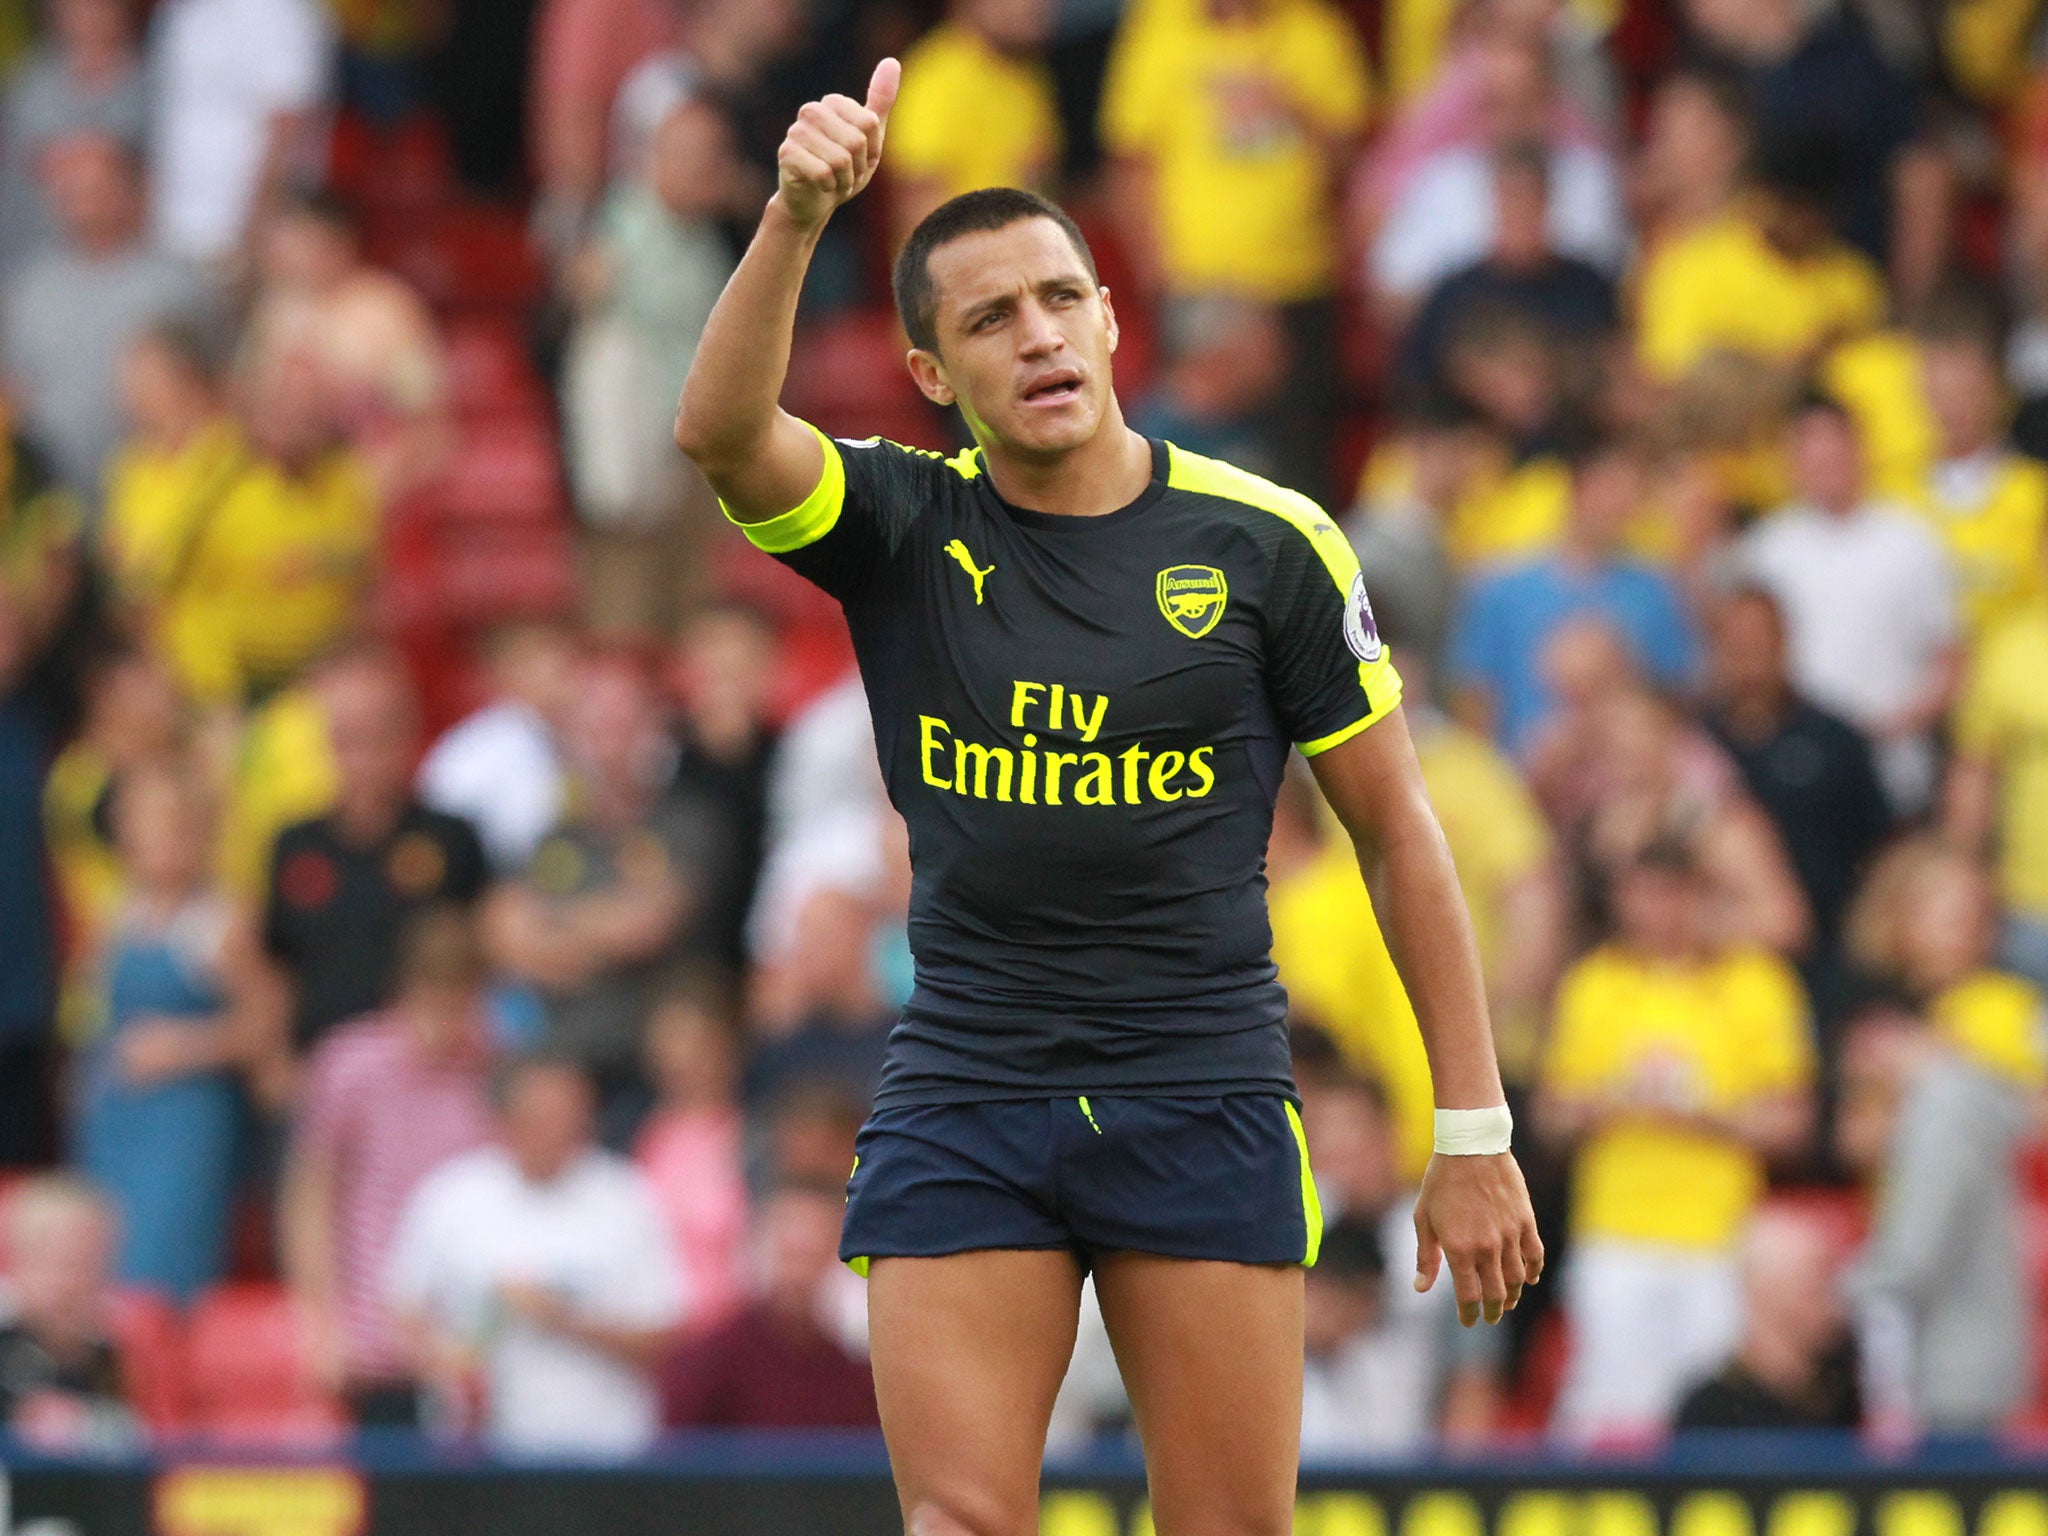 Alexis Sanchez starts on the bench, as does Granit Xhaka